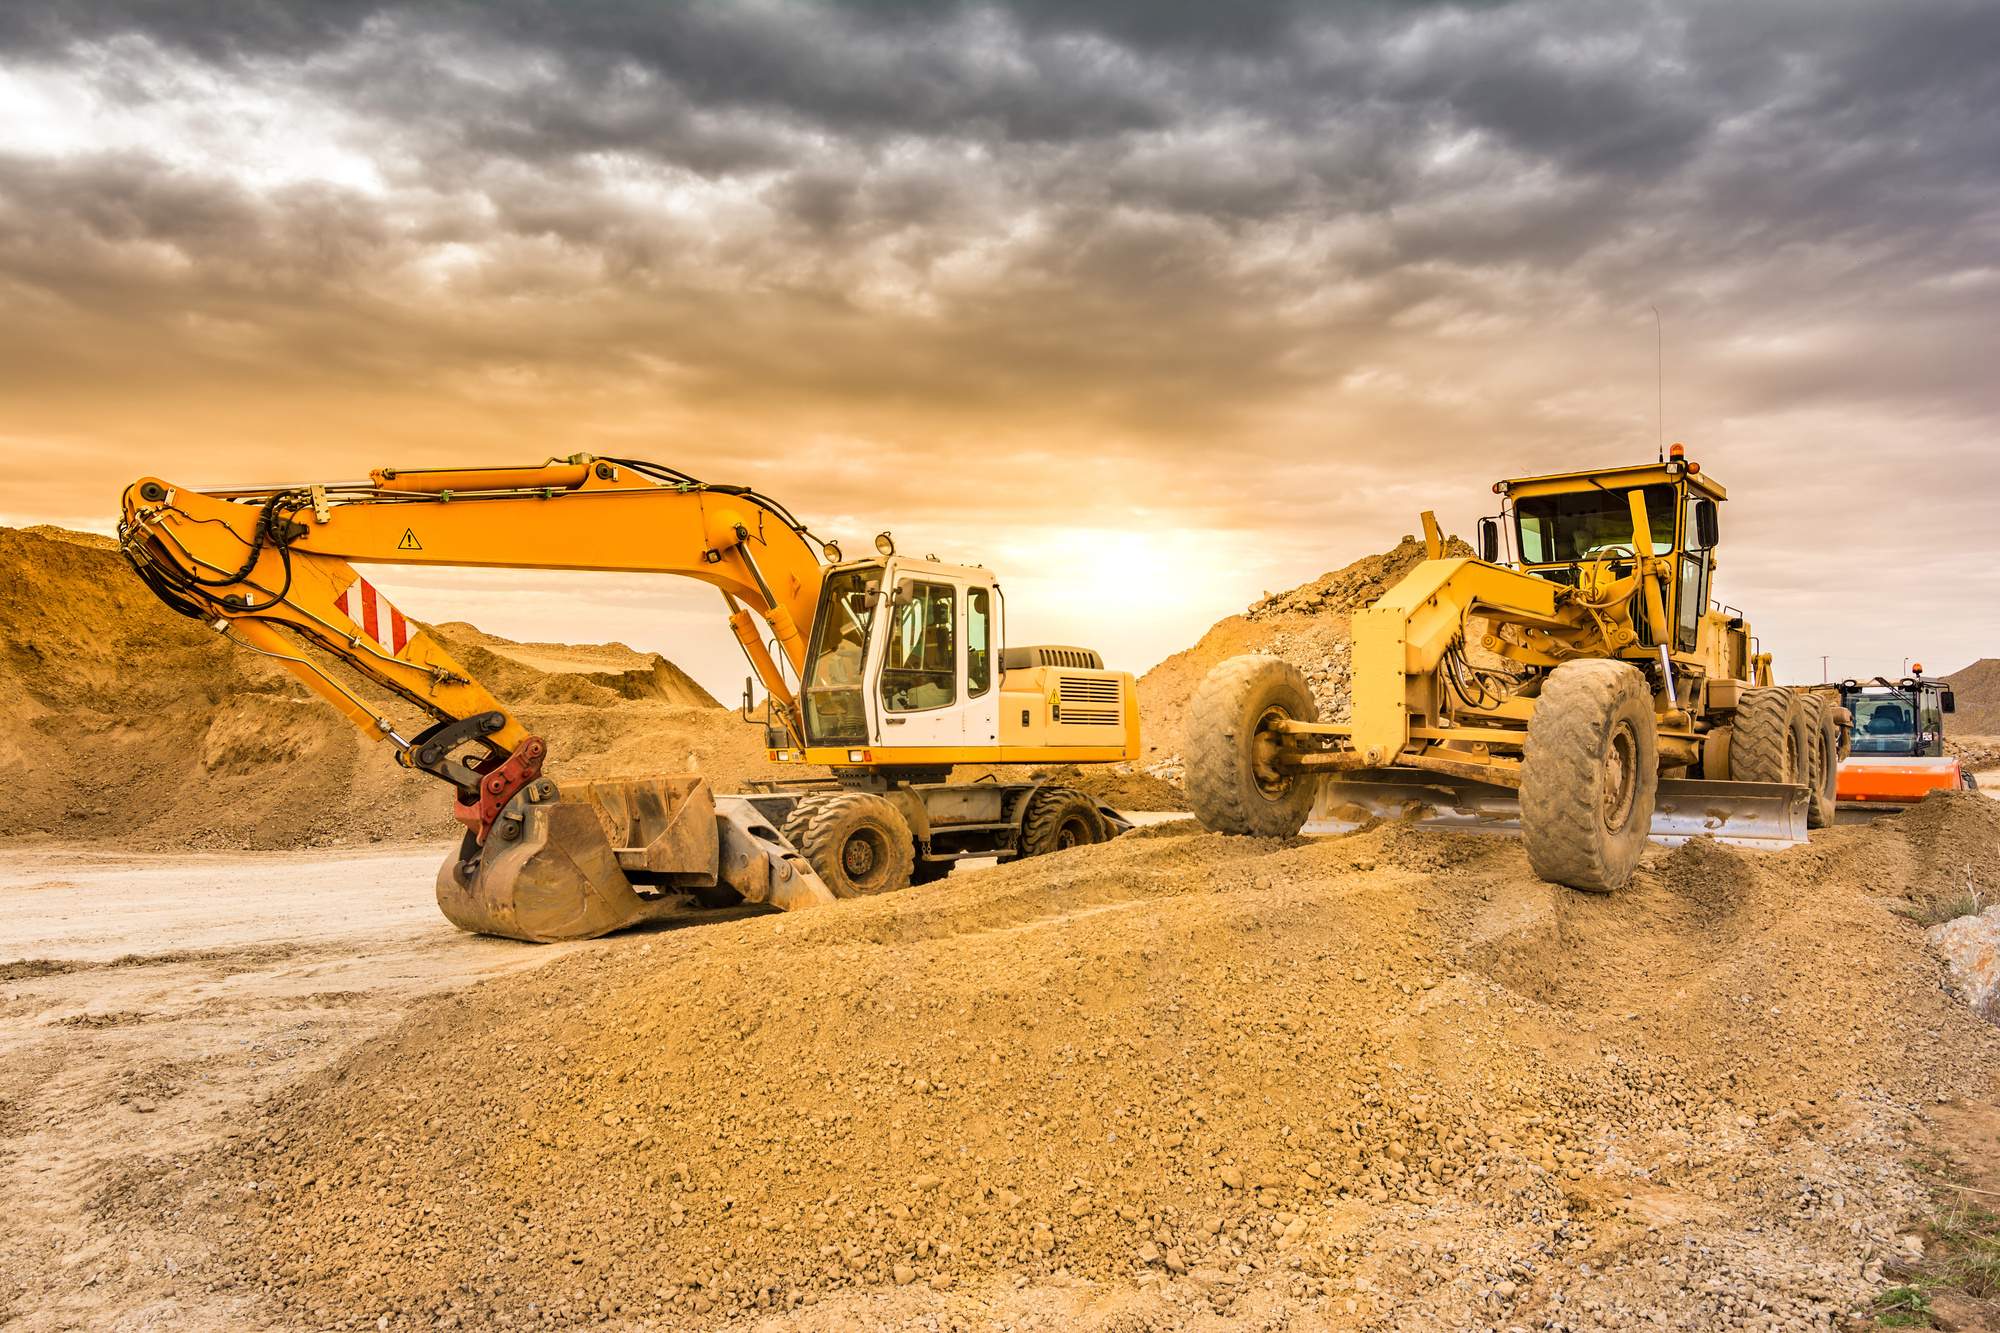 The Most Essential Construction Equipment for a Construction Business